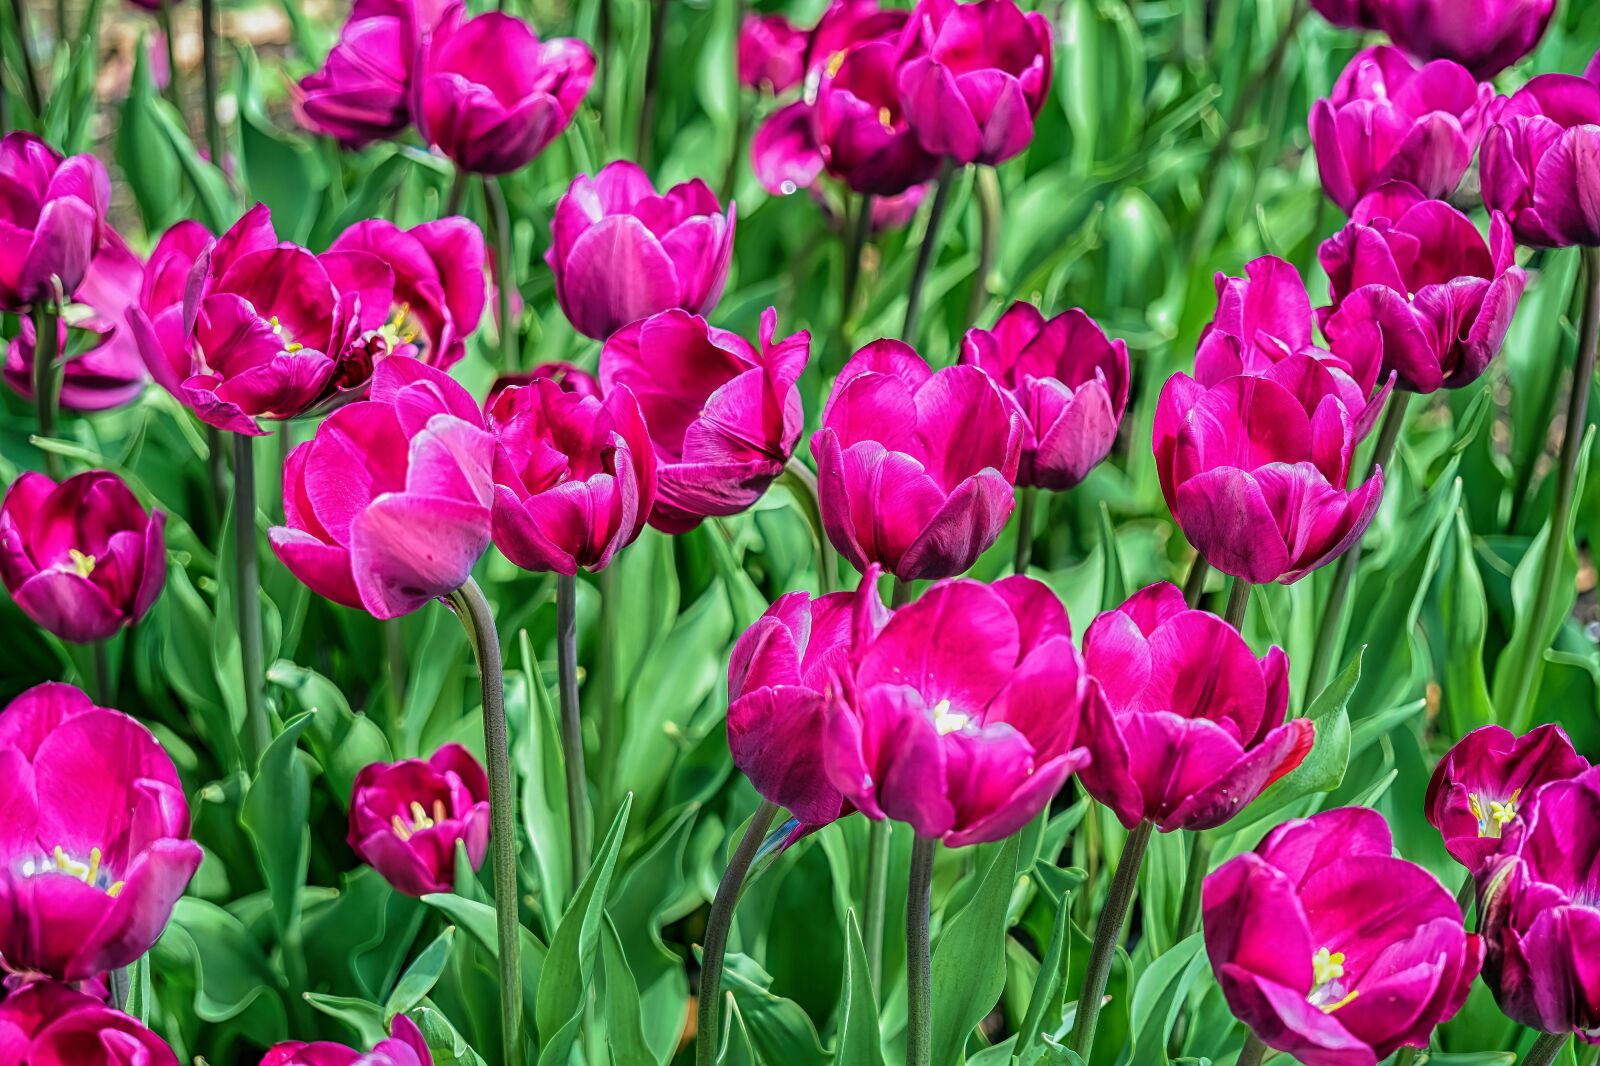 Sony a6300 sample photo. Tulips, flowers, spring photography